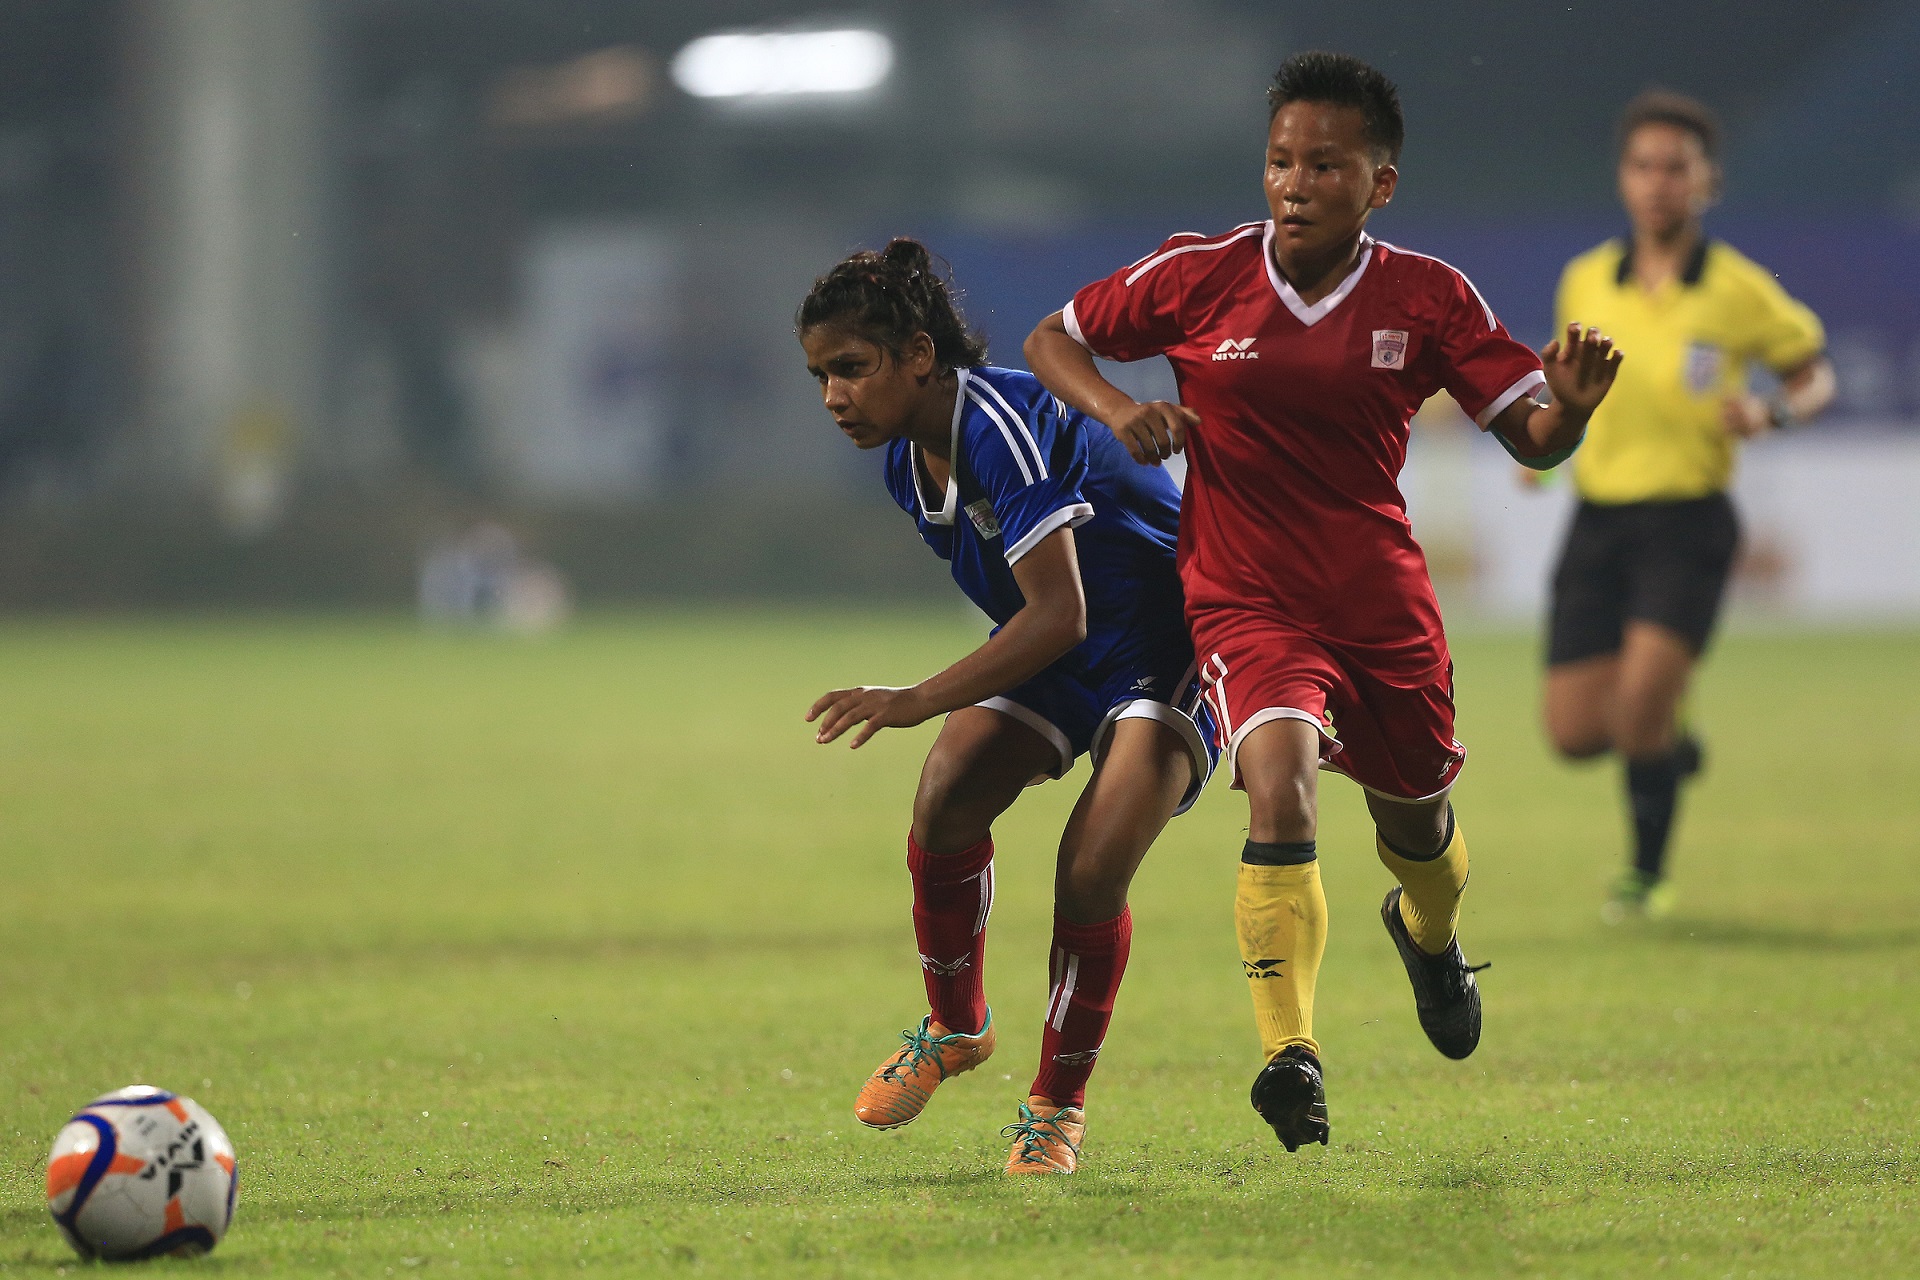 Tigresses and Panthers players fight for ball during match 3 of the Hero U17 Womens Championship between the Tigresses and the Panthers held at the Kalyani Stadium, Kaylani, West Bengal, India on the 13th November 2019. Photo by: Arjun Singh / SPORTZPICS for ISL